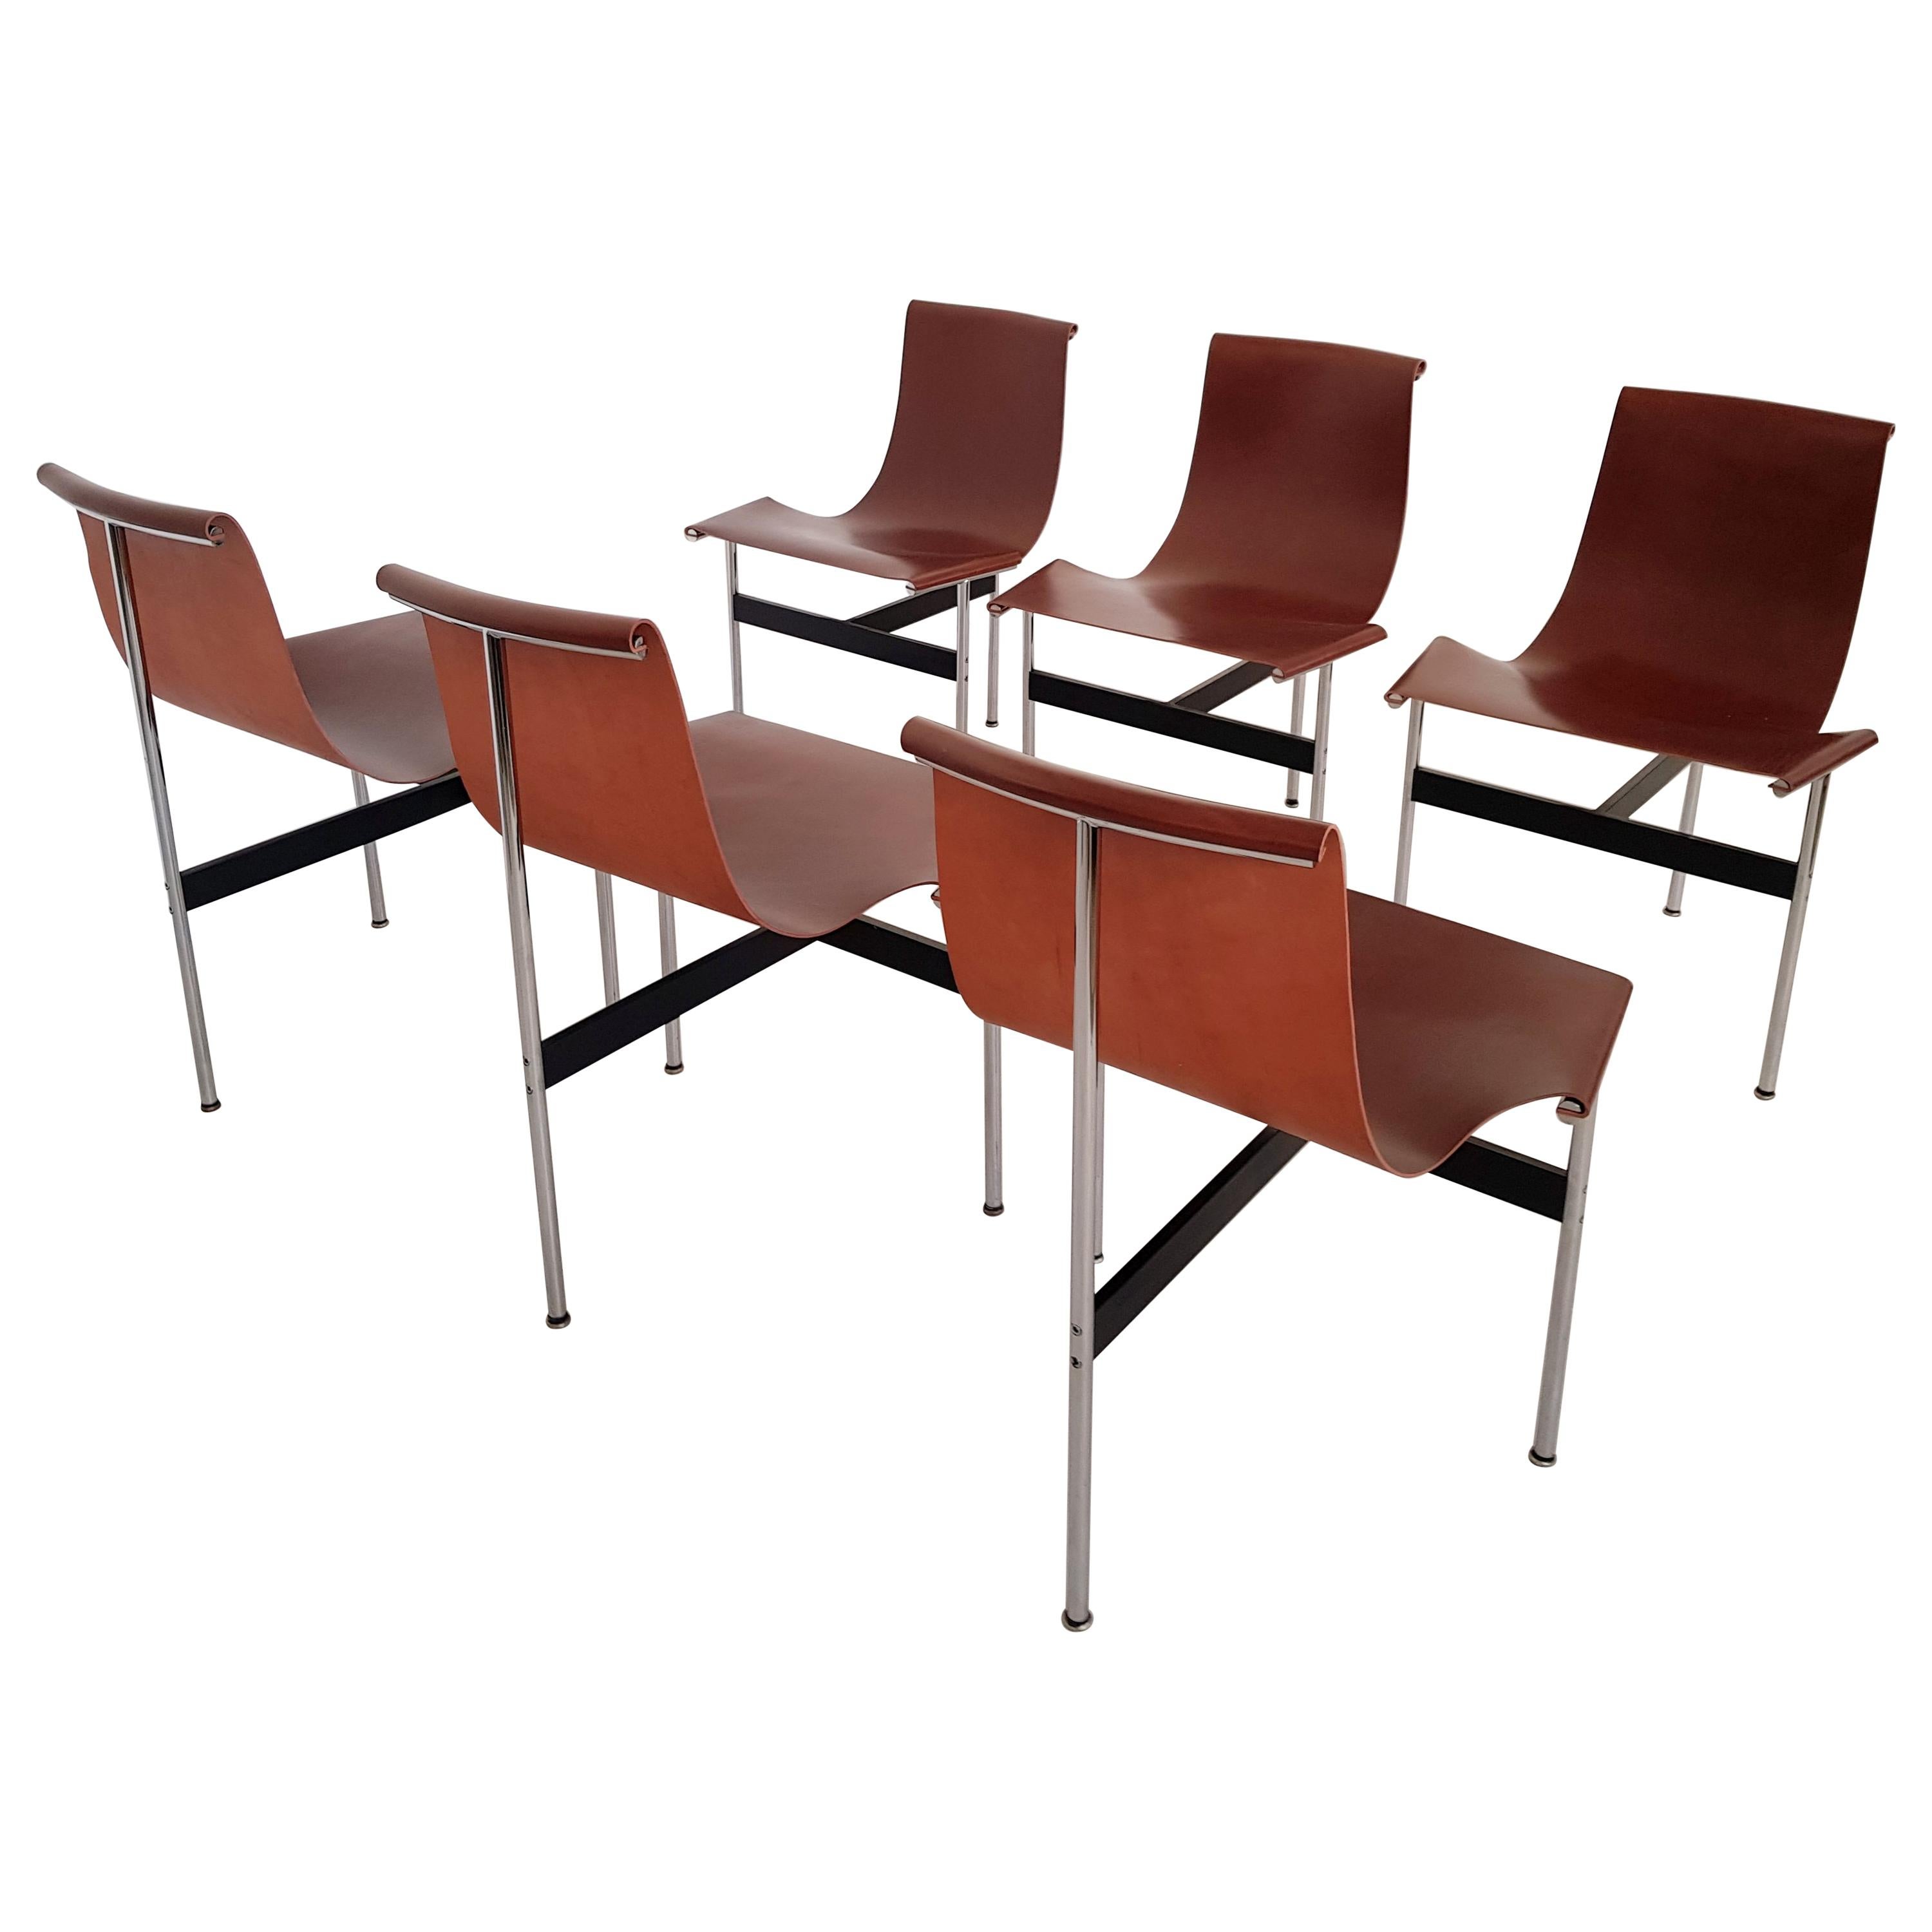 Brown leather original T-Chairs by Katavolos, Kelly, Littell for Laverne, 1967